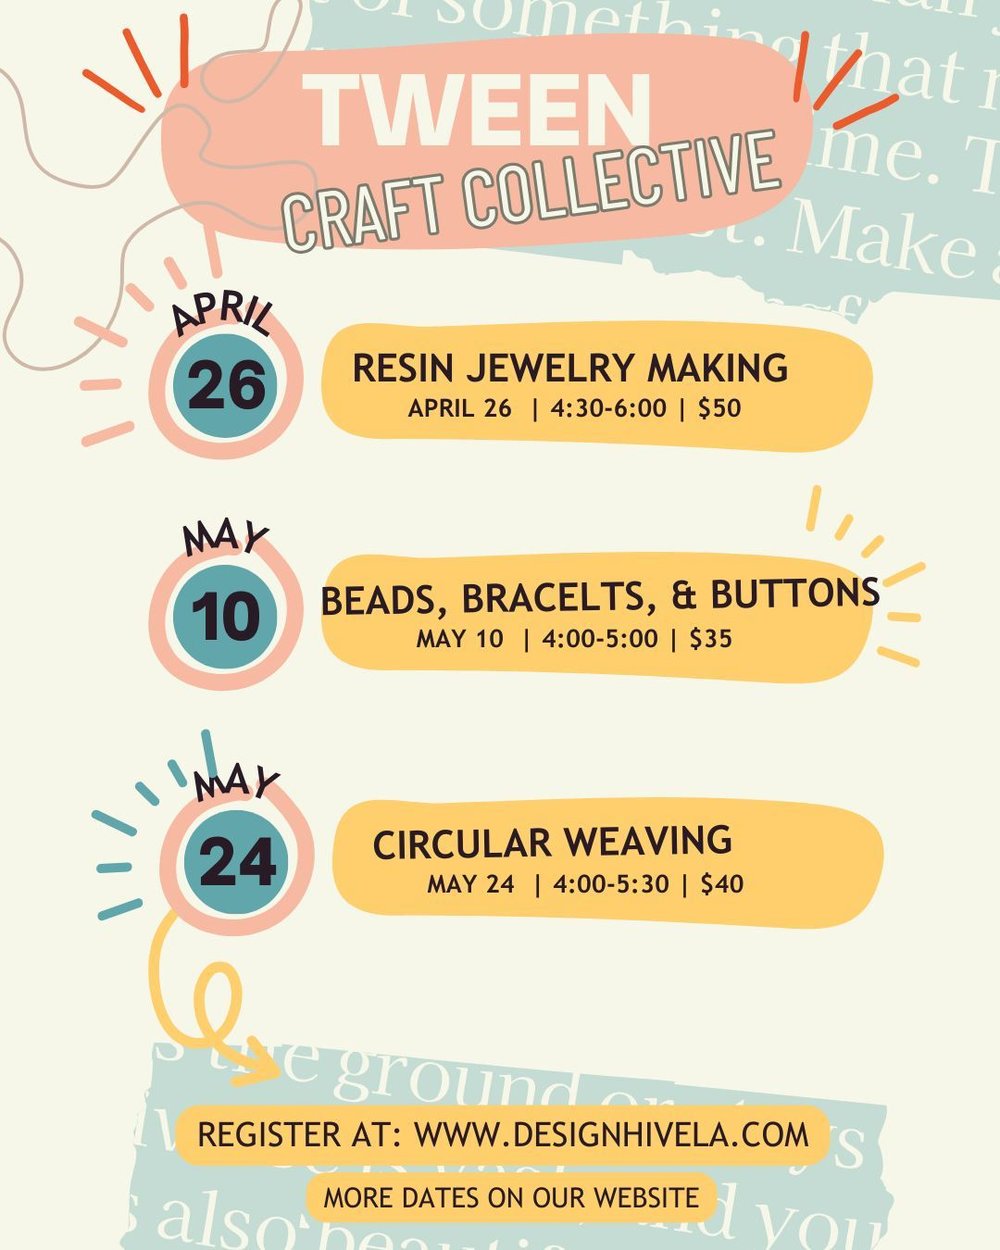 NEW WORKSHOPS! TWEEN CRAFT COLLECTIVE ⁠
Ages 10-13⁠
FRIDAY AFTERNOONS⁠
⁠
Introducing our NEW tween craft classes, designed specifically for the unique and transformative ages of 10-13! This time is filled with rapid growth, discovery, and change, bot